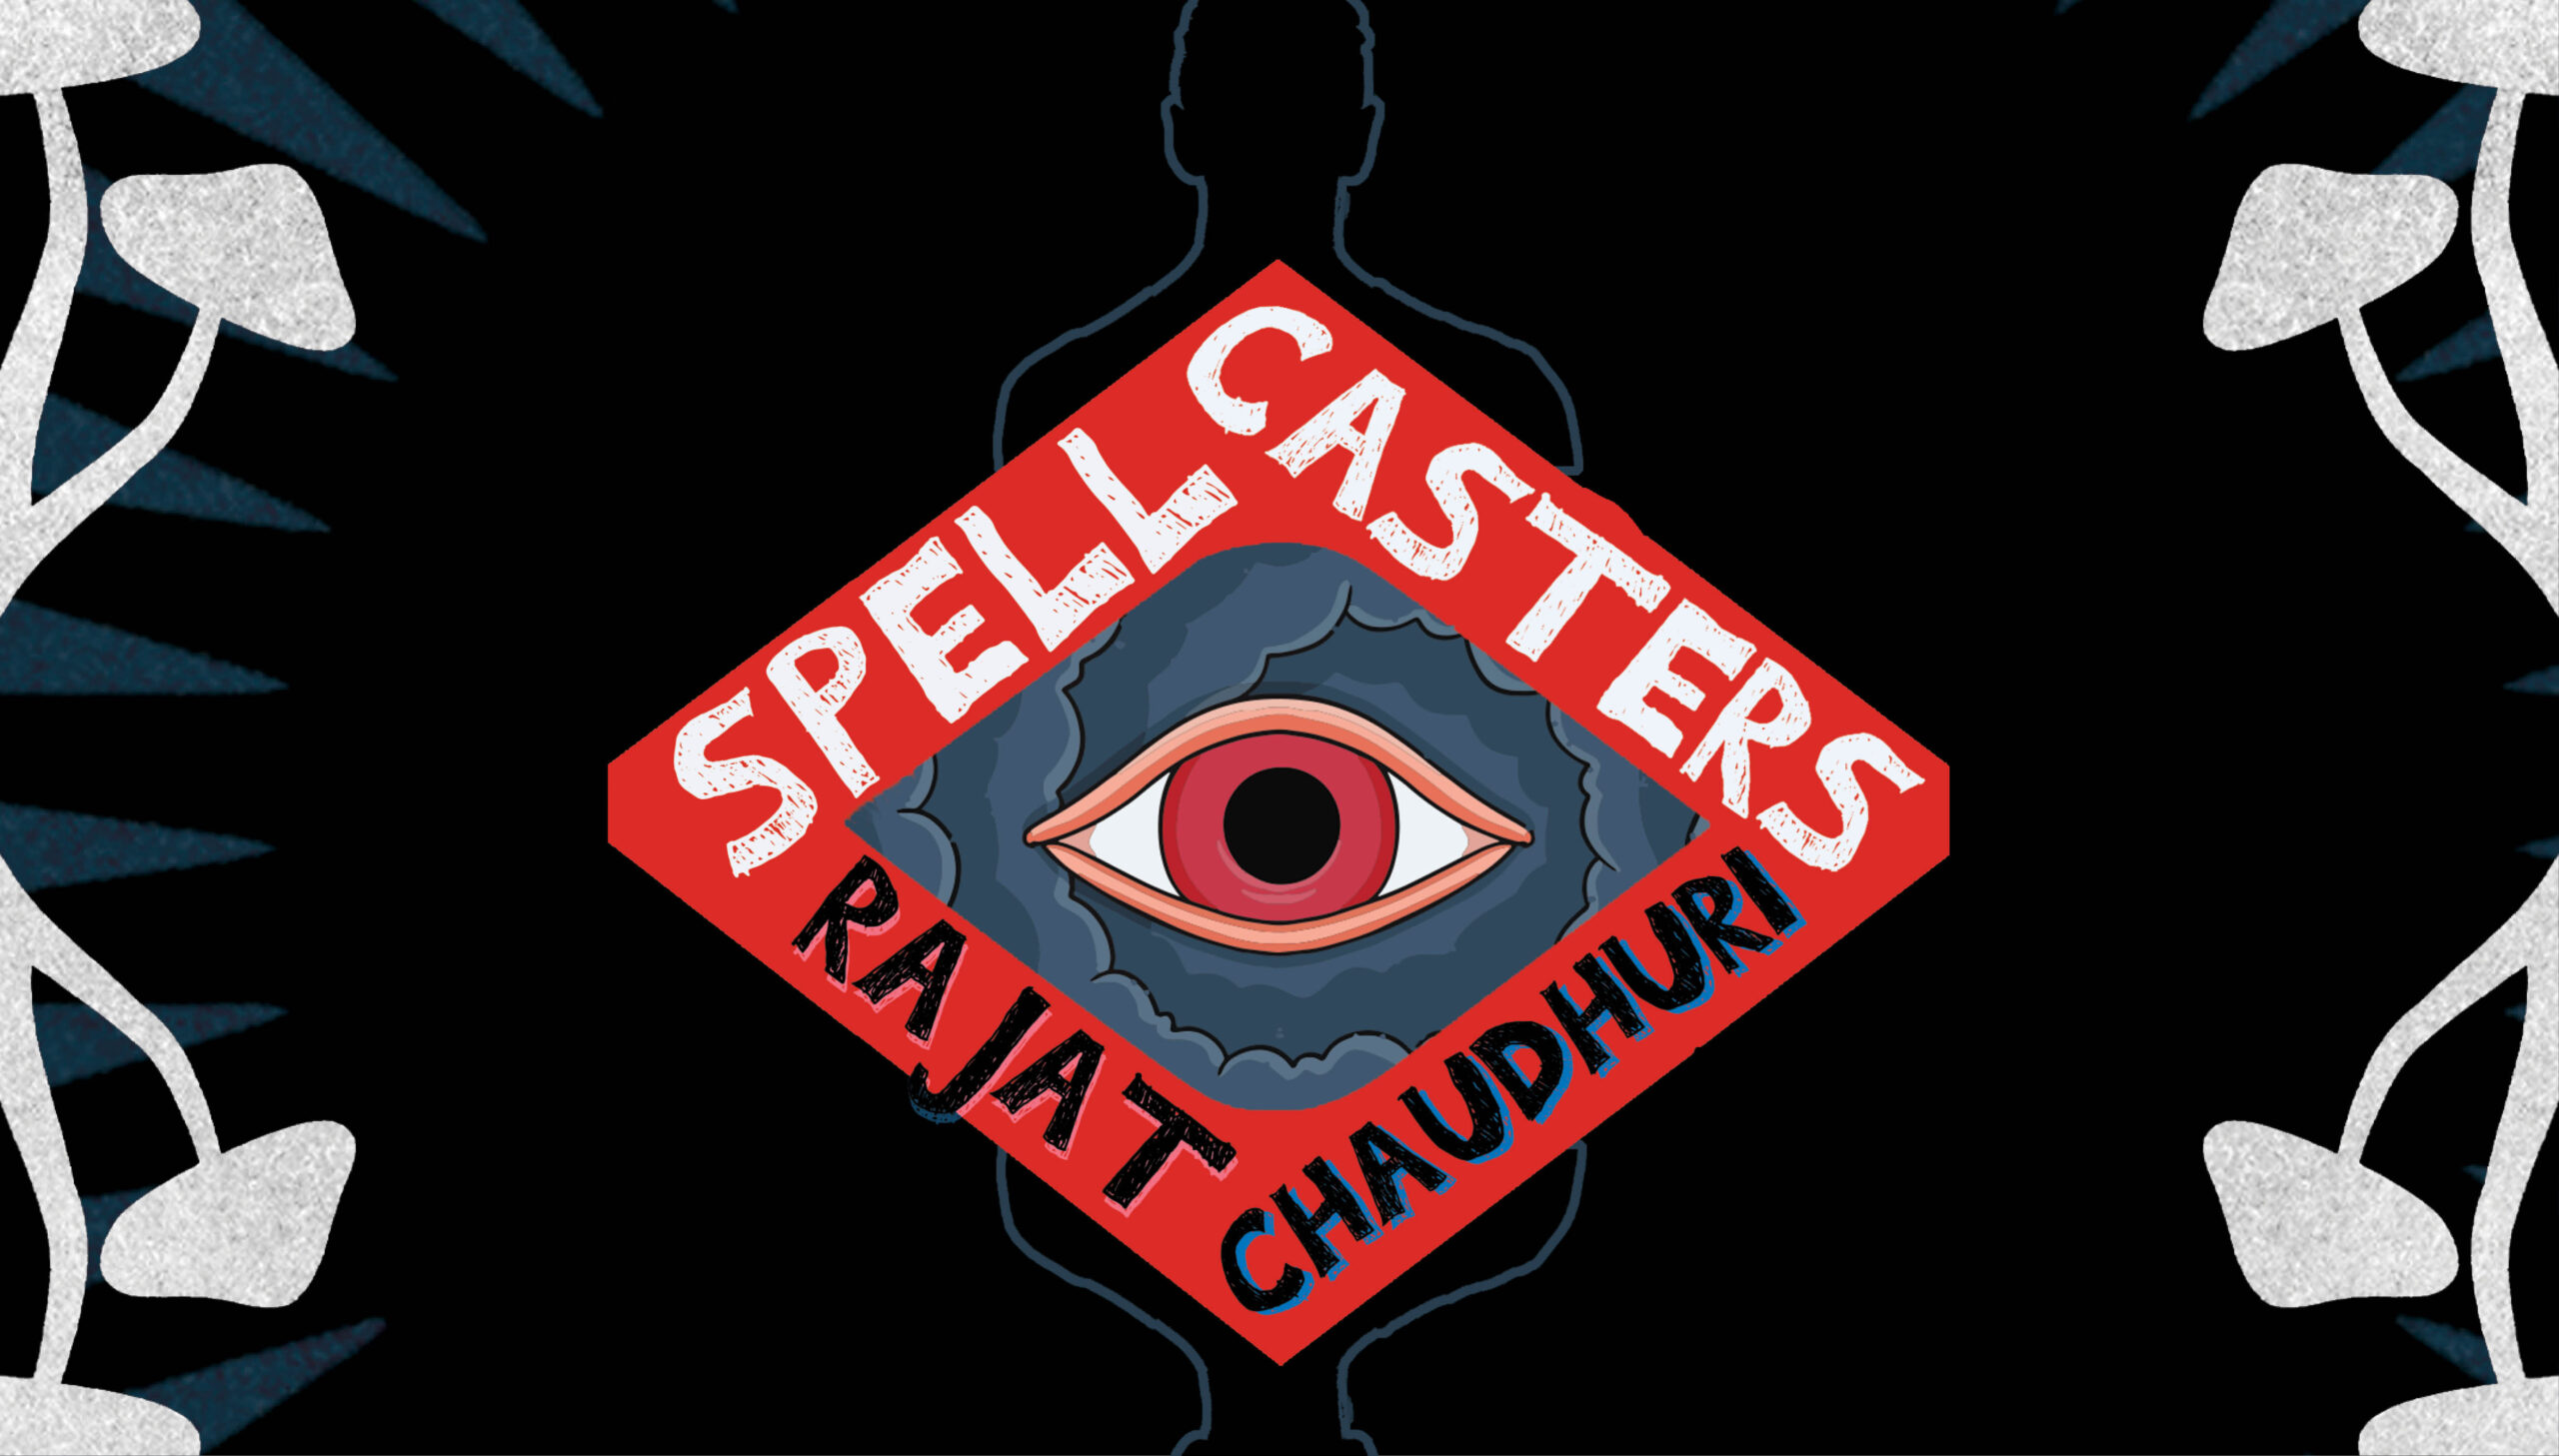 New Release: SPELLCASTERS by Rajat Chaudhuri